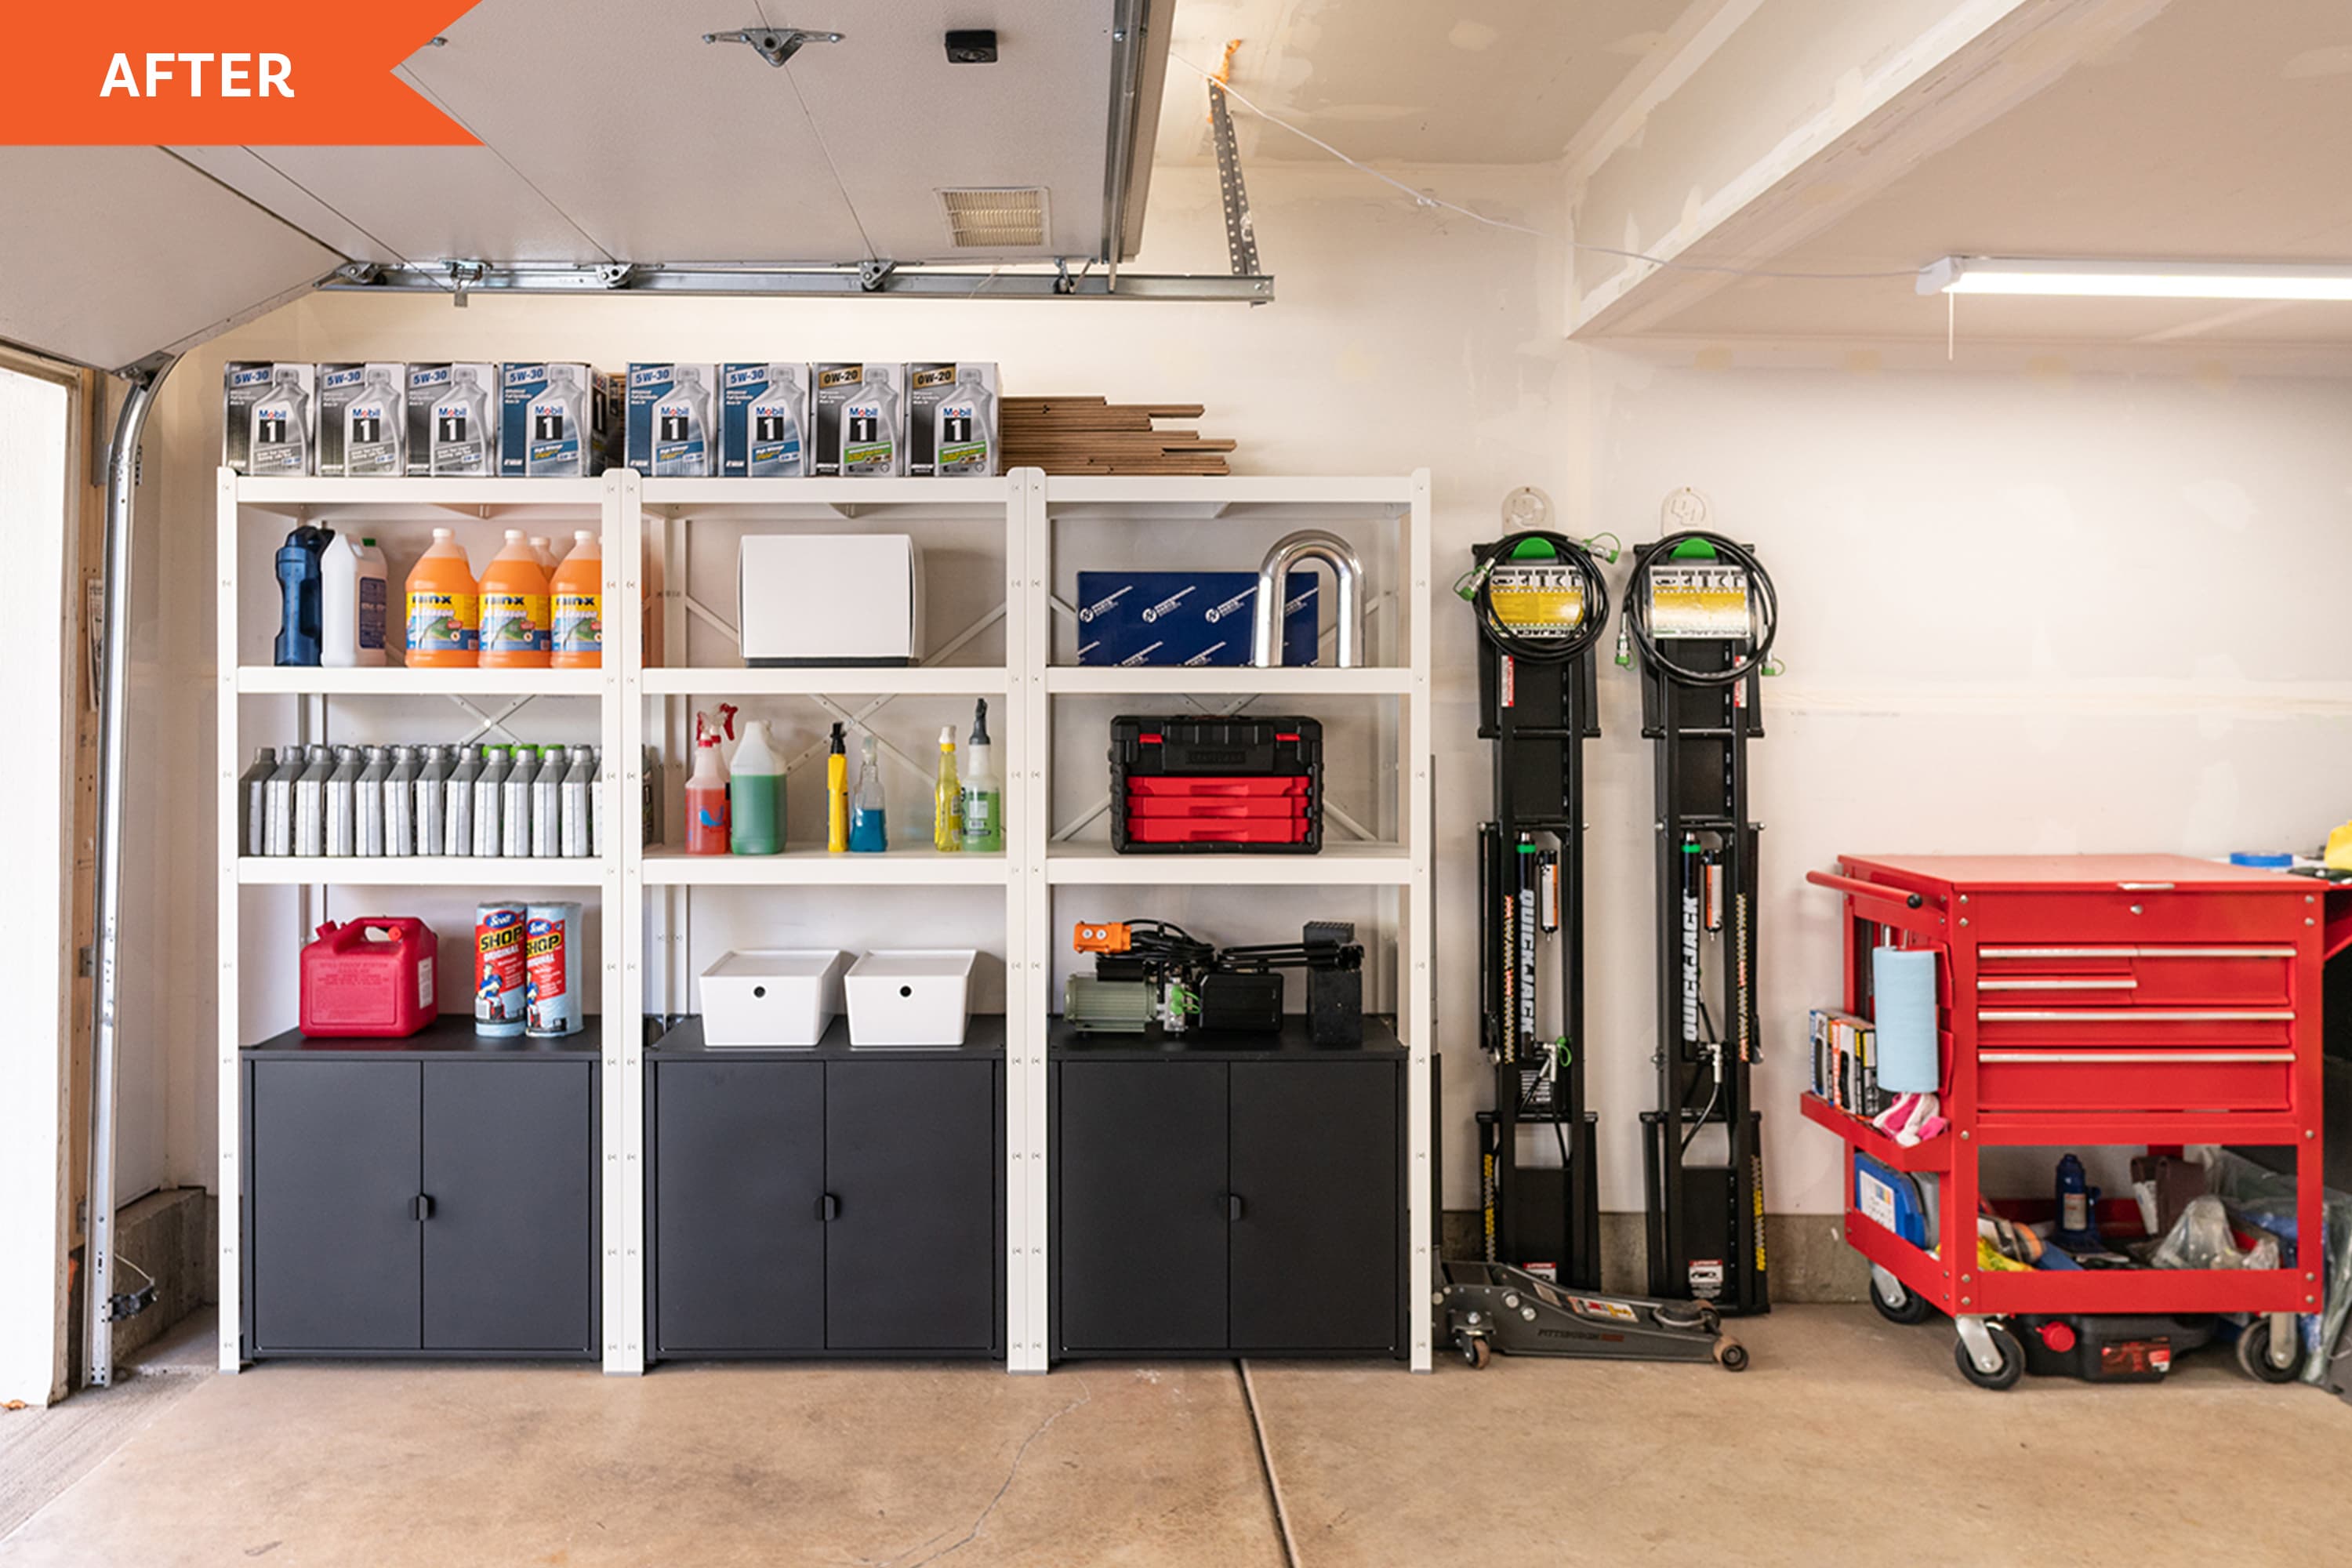 How I Created The Best Garage Organization For Under $500 - By Sophia Lee